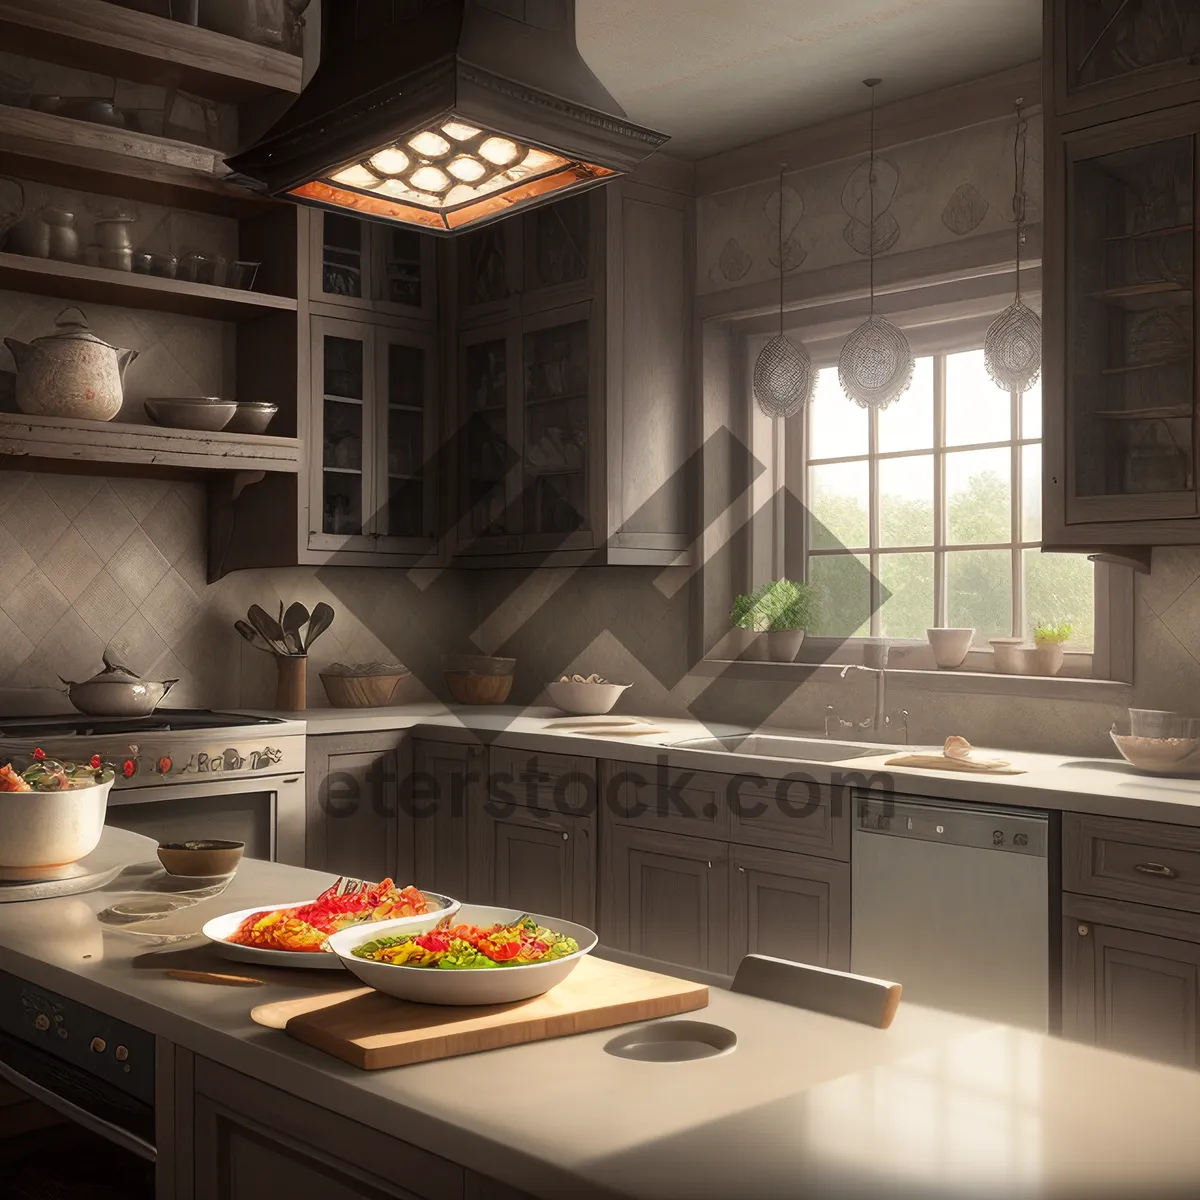 Picture of English-style kitchen design with modern appliances